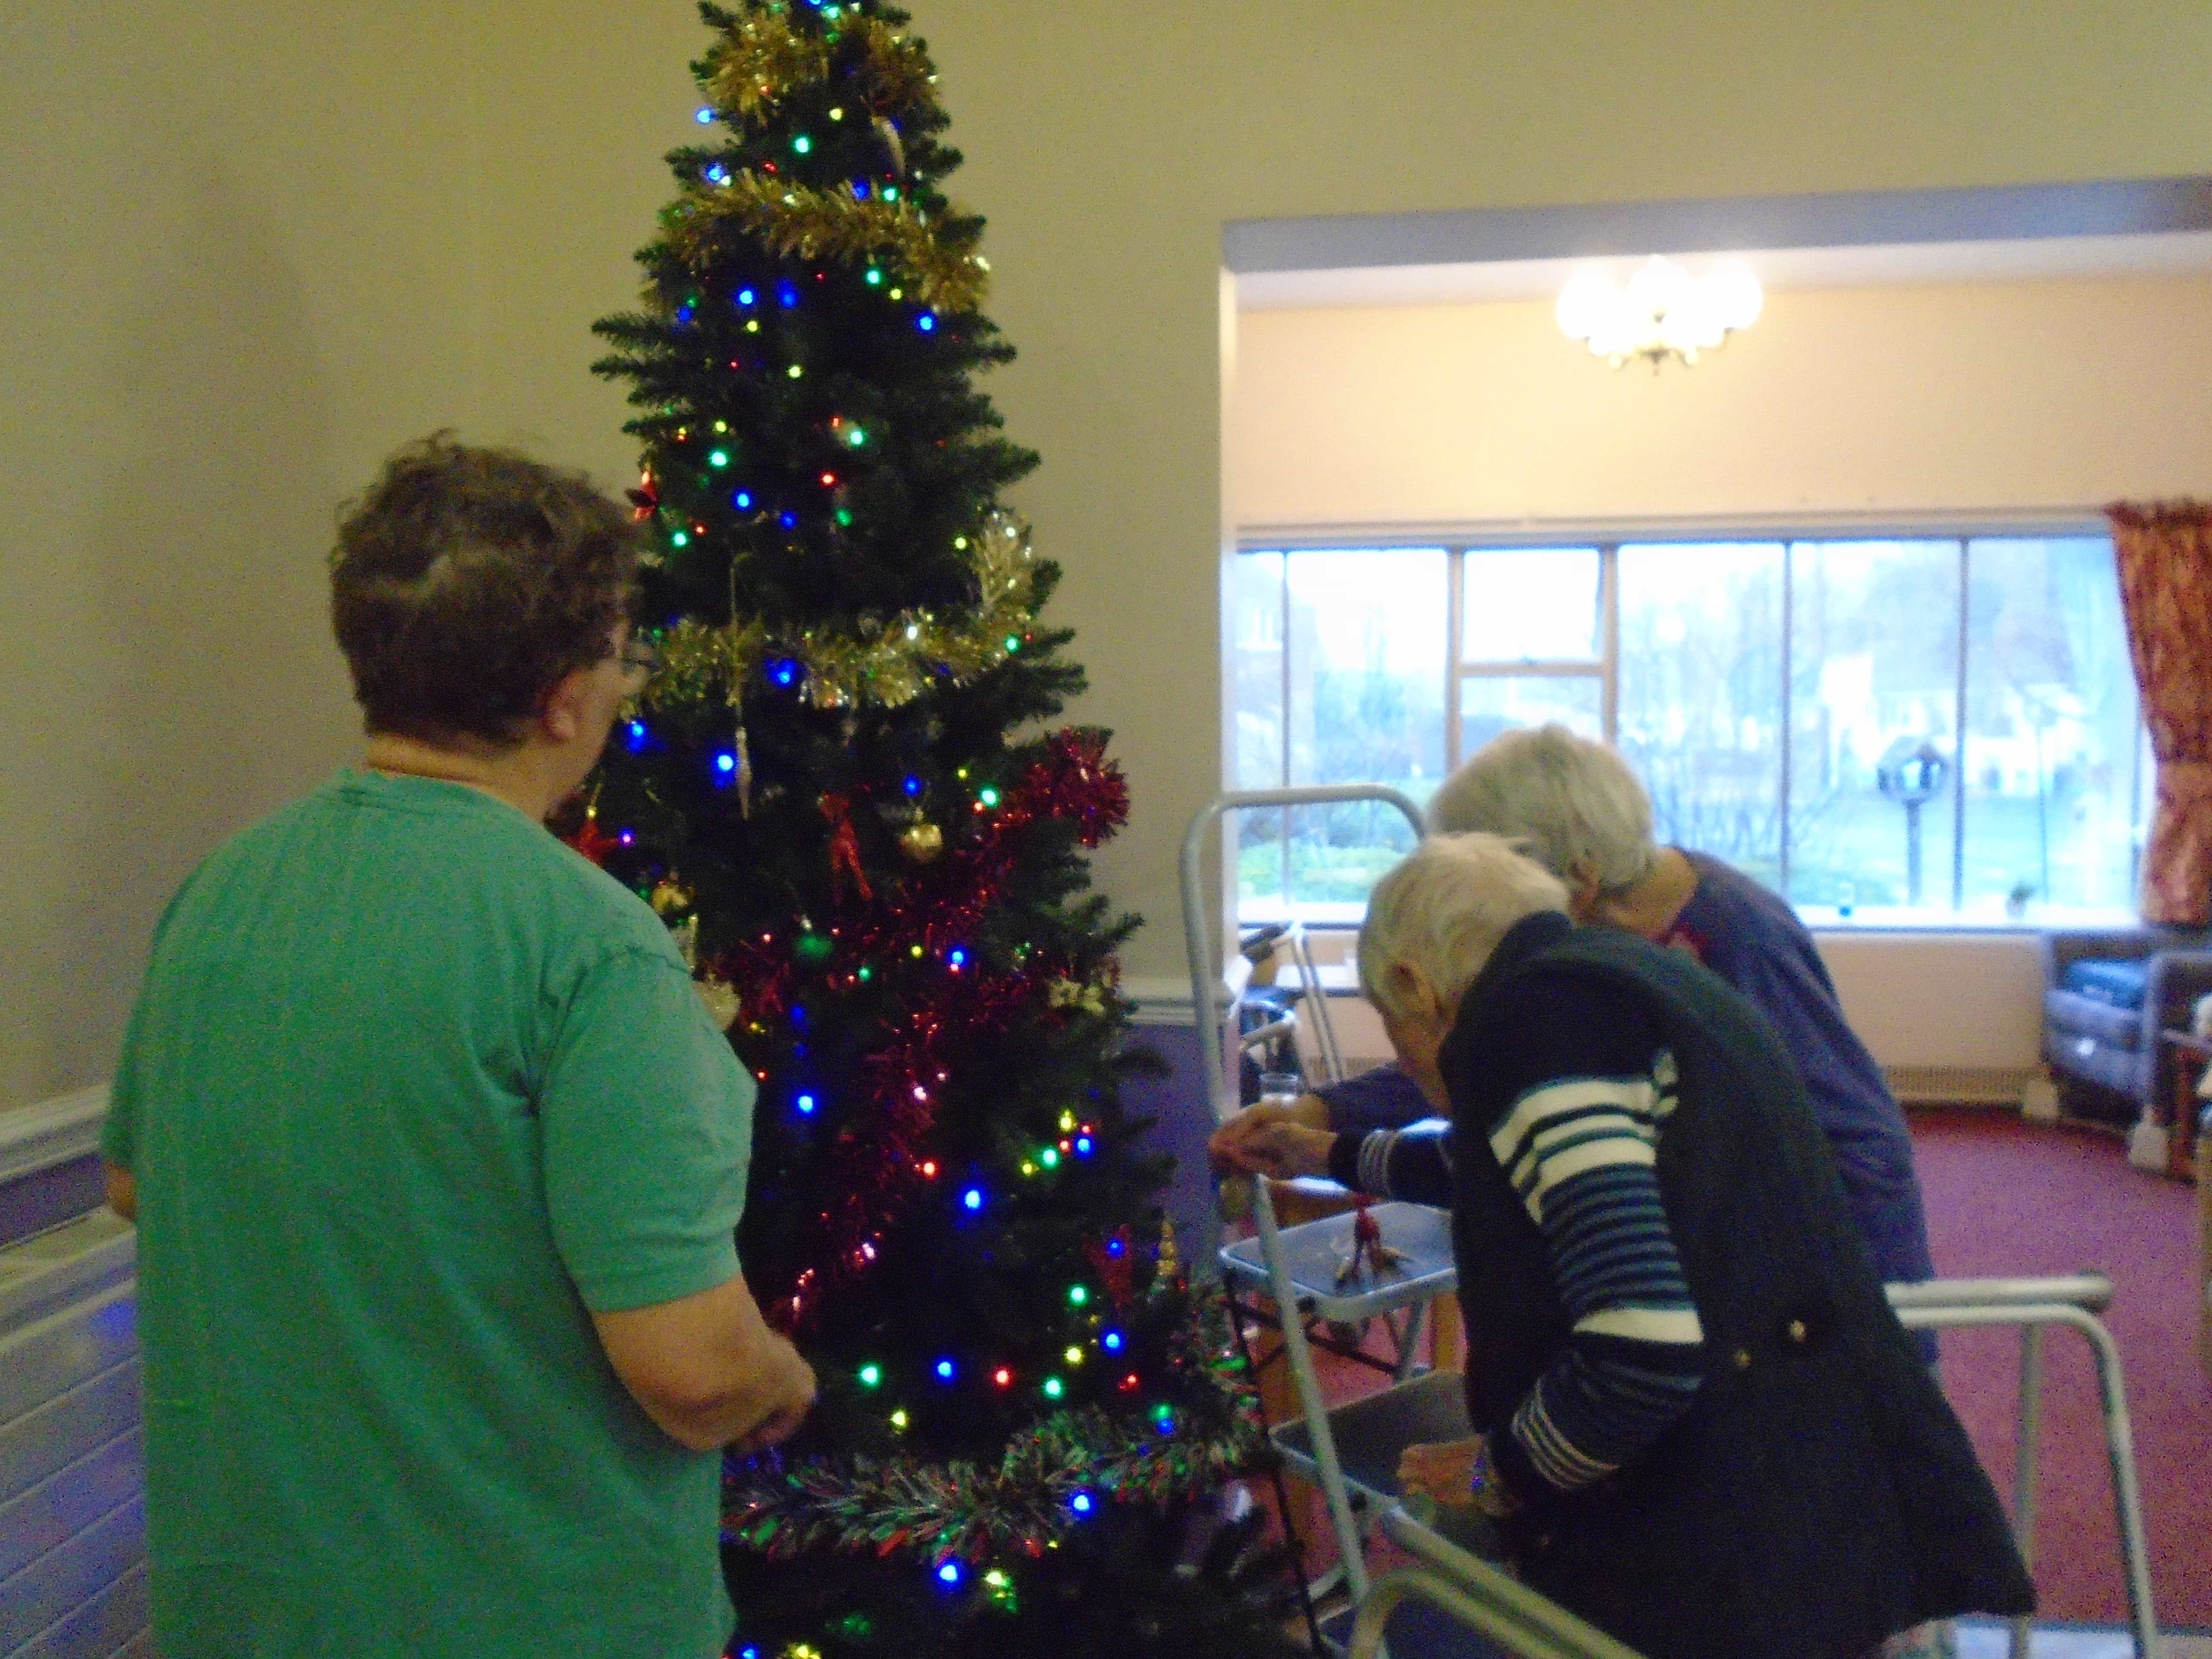 residents decorating the Christmas tree